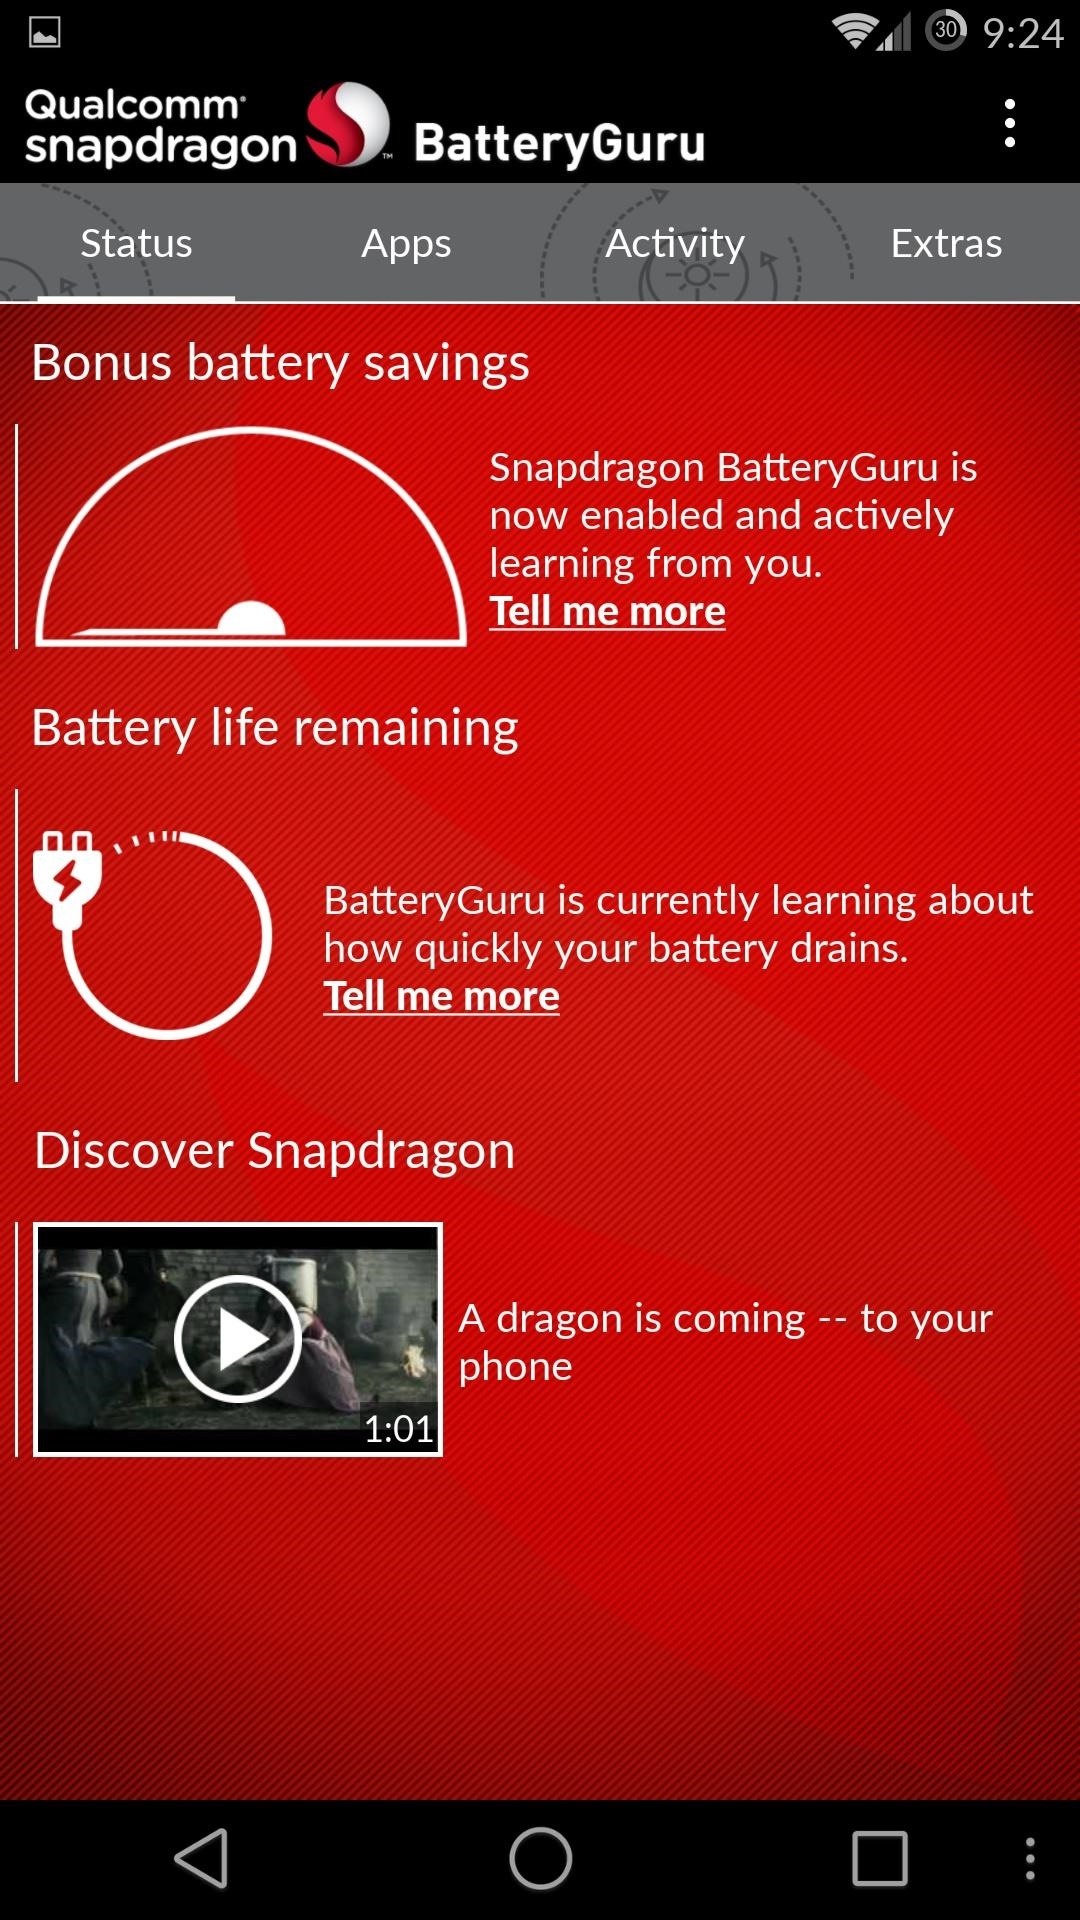 How to Make Your Battery Last All Day Long: 5 Power-Saving Tips for the OnePlus One